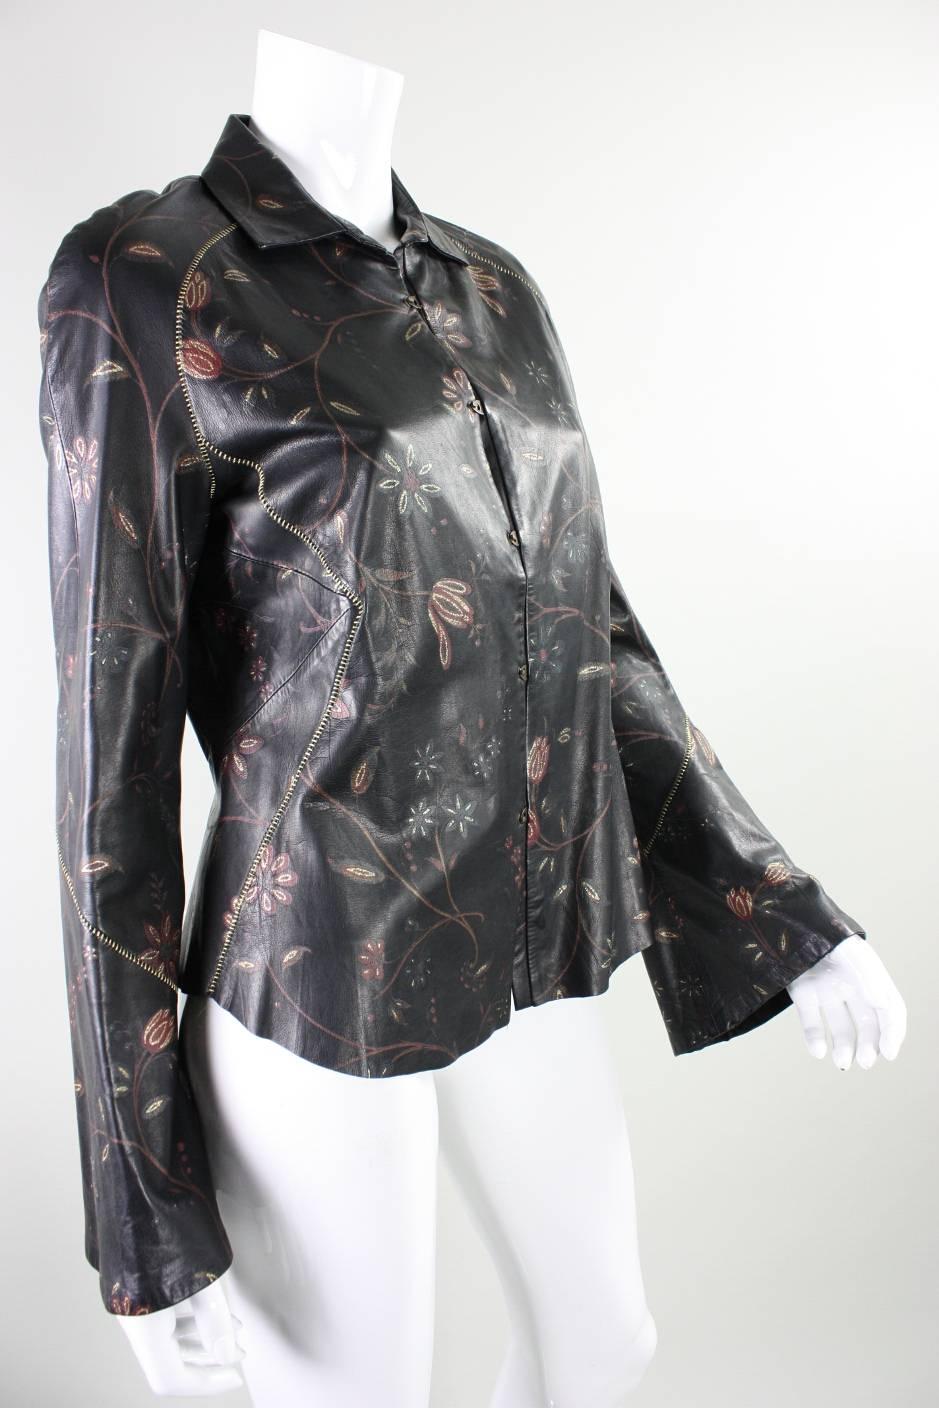 Roberto Cavalli buttery soft leather blouse or jacket has a rock & roll and western vibe.  It features slightly belled sleeves, gold-metallic stitching, and dark red and gold flowers.  Center front metal closures.  Partially lined.

Labeled size